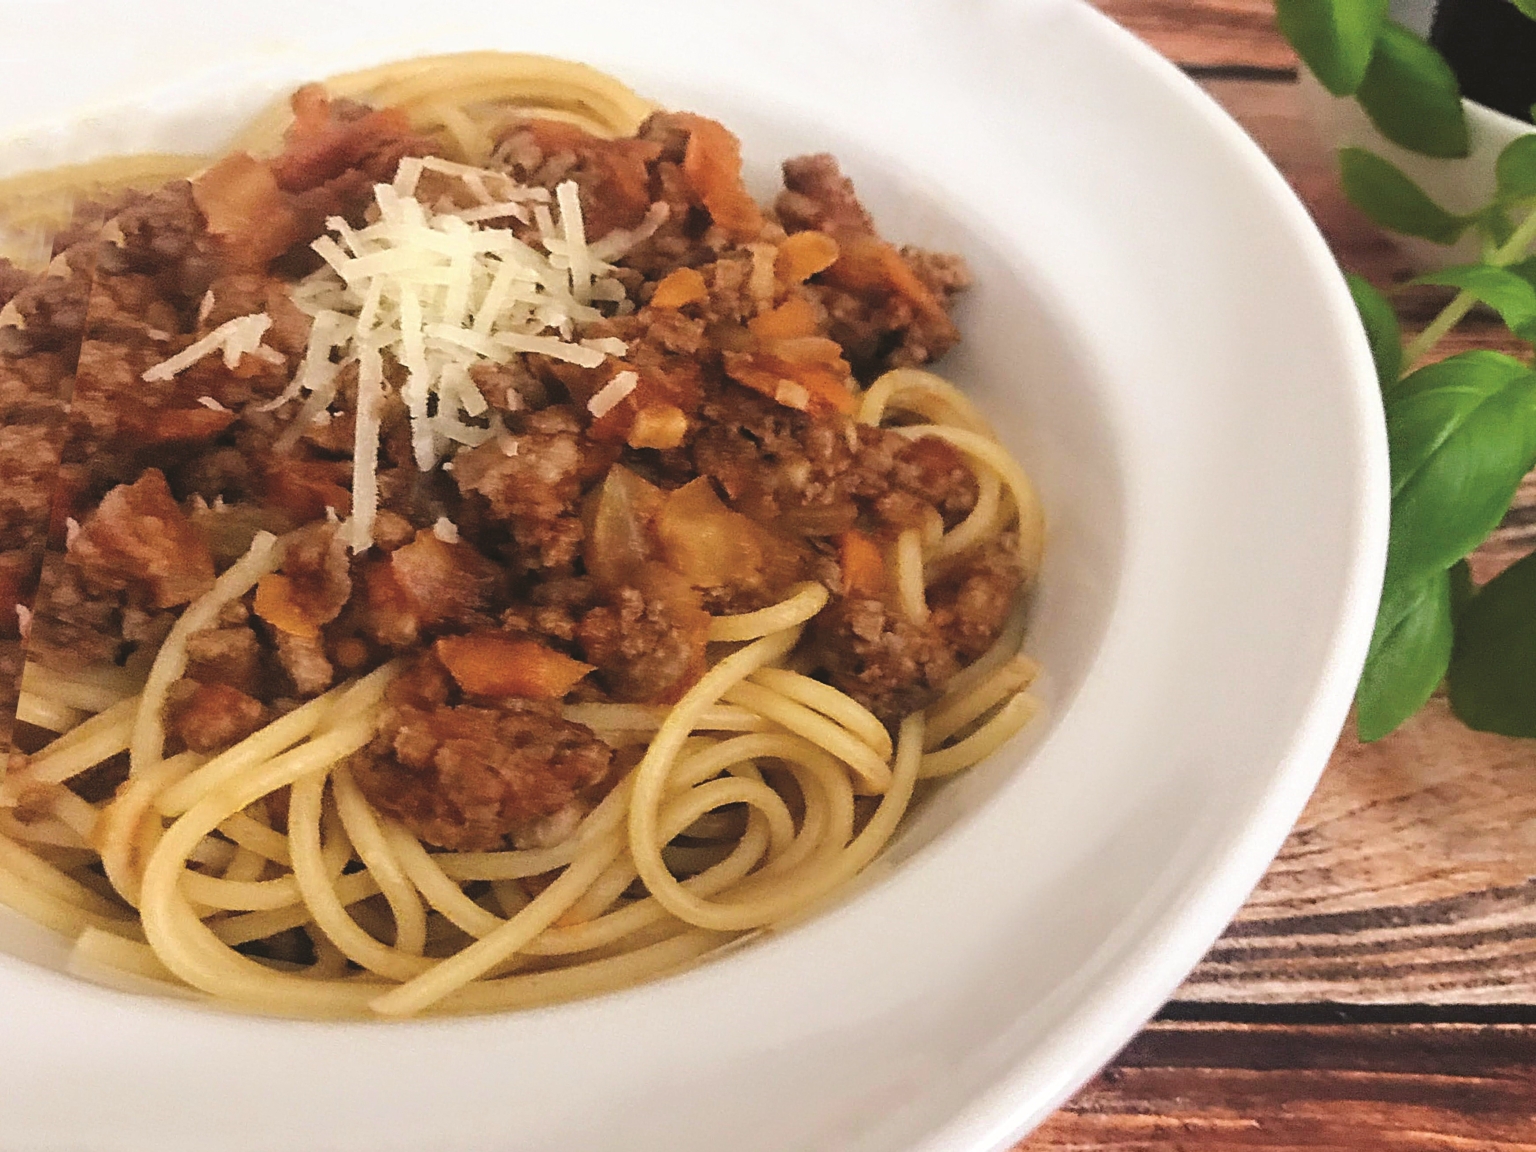 Spaghetti bolognese - Joy of Cooking